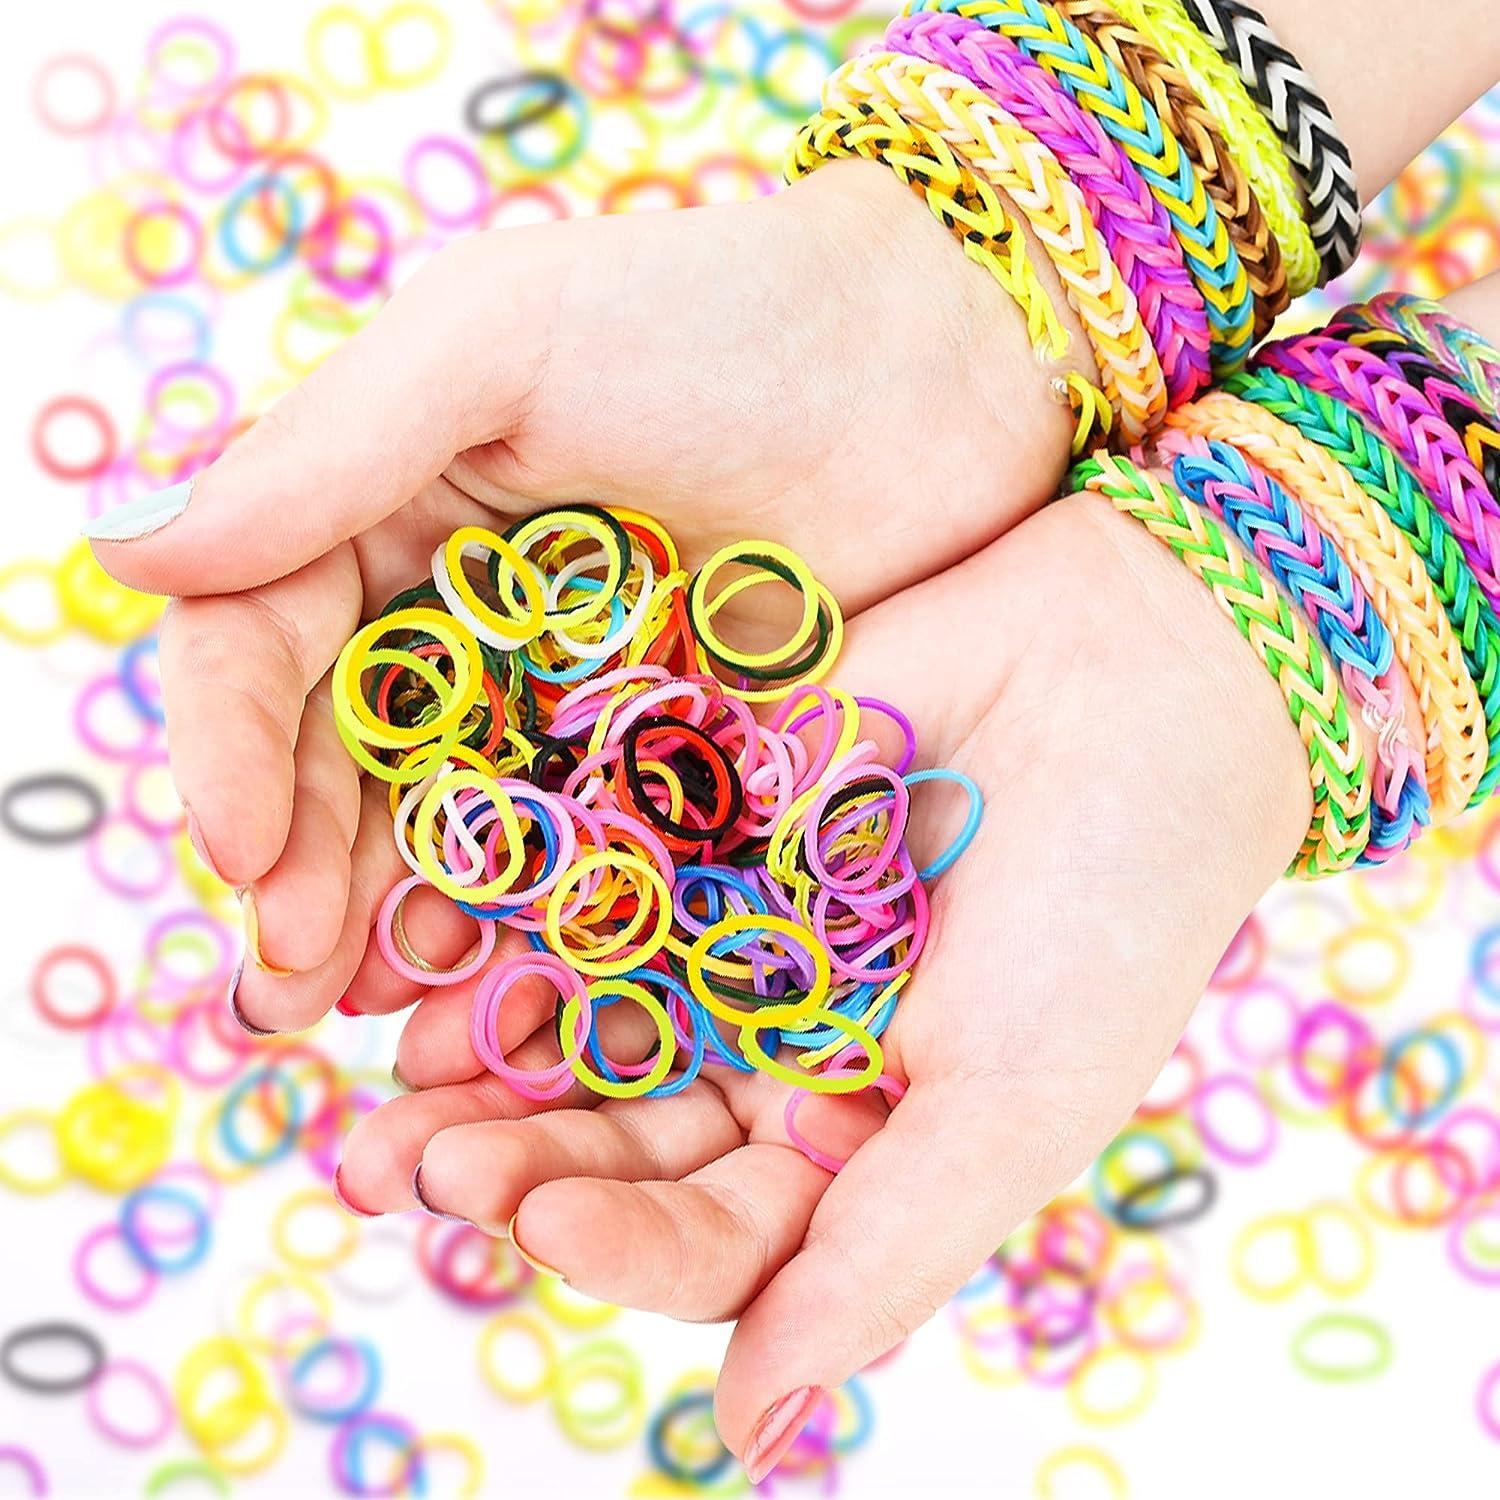 rubber band for rainbow loom bracelet, rubber band for rainbow loom  bracelet Suppliers and Manufacturers at